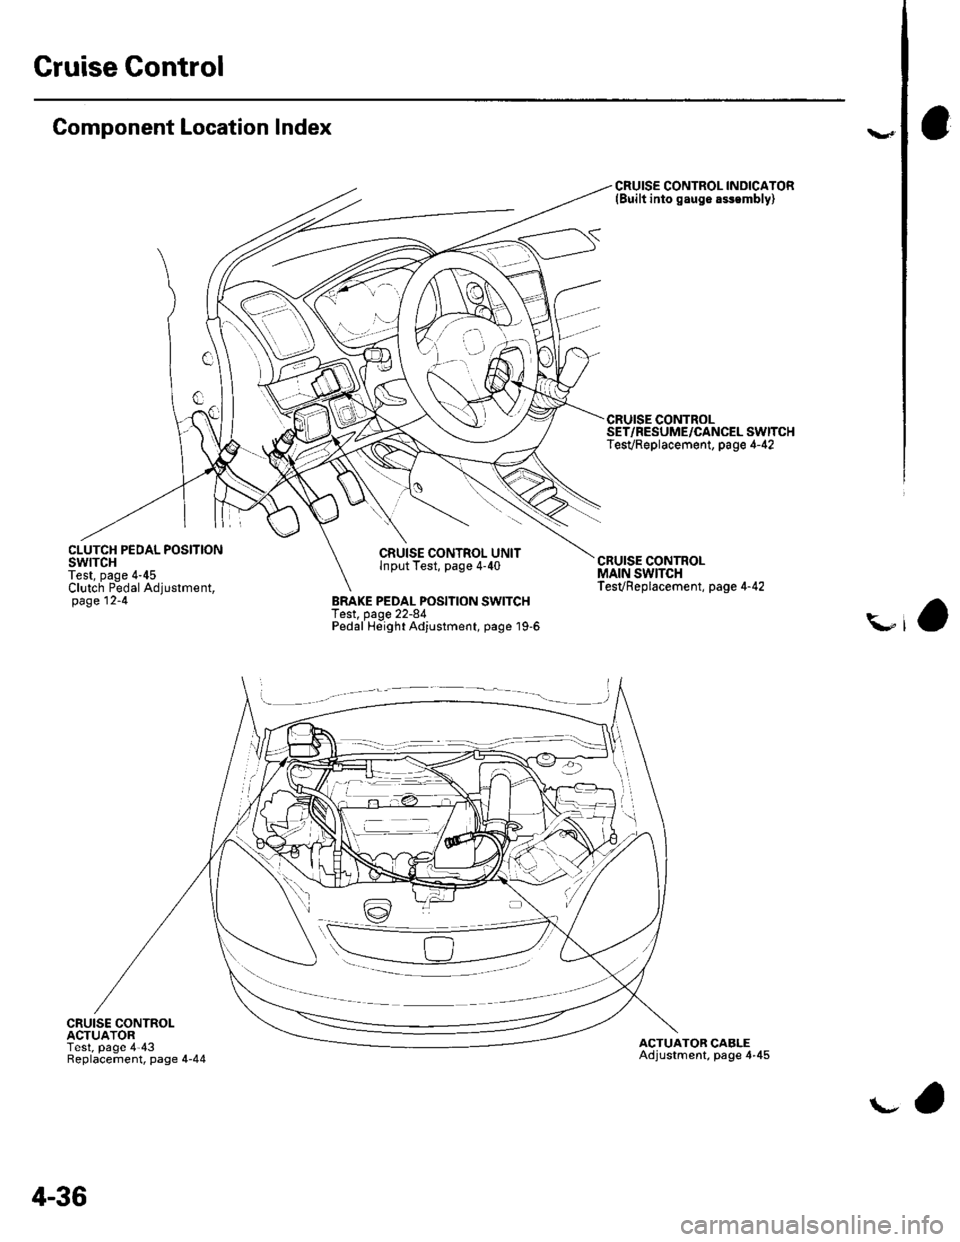 HONDA CIVIC 2002 7.G Workshop Manual Gruise Control
Component Location Index
CLUTCH PEDAL POSITIONswtTcHTest, page 4-45Clutch Pedal Adjustment,page 12-4
t.- _,- _
CRUISE CONTROLACTUATORTest, page 443Replacement, page 4-44
CRUISE CONTROL